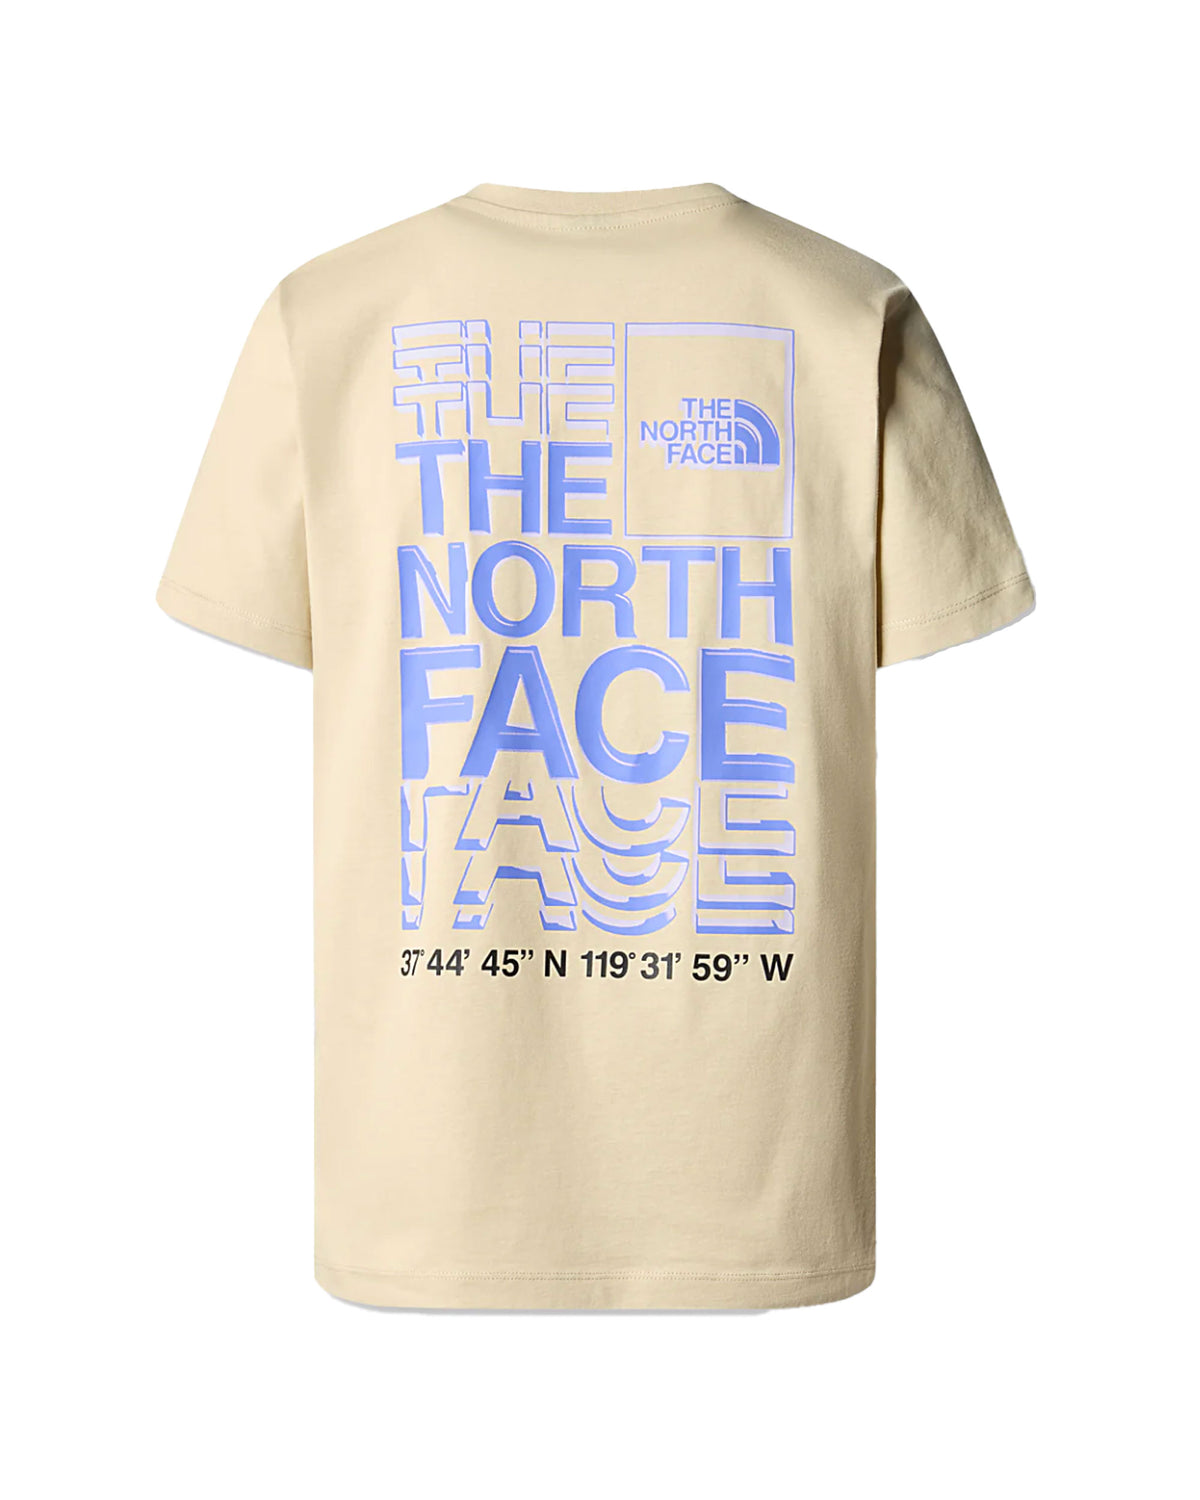 T-Shirt Donna The North Face Coordinate Gravel Beige